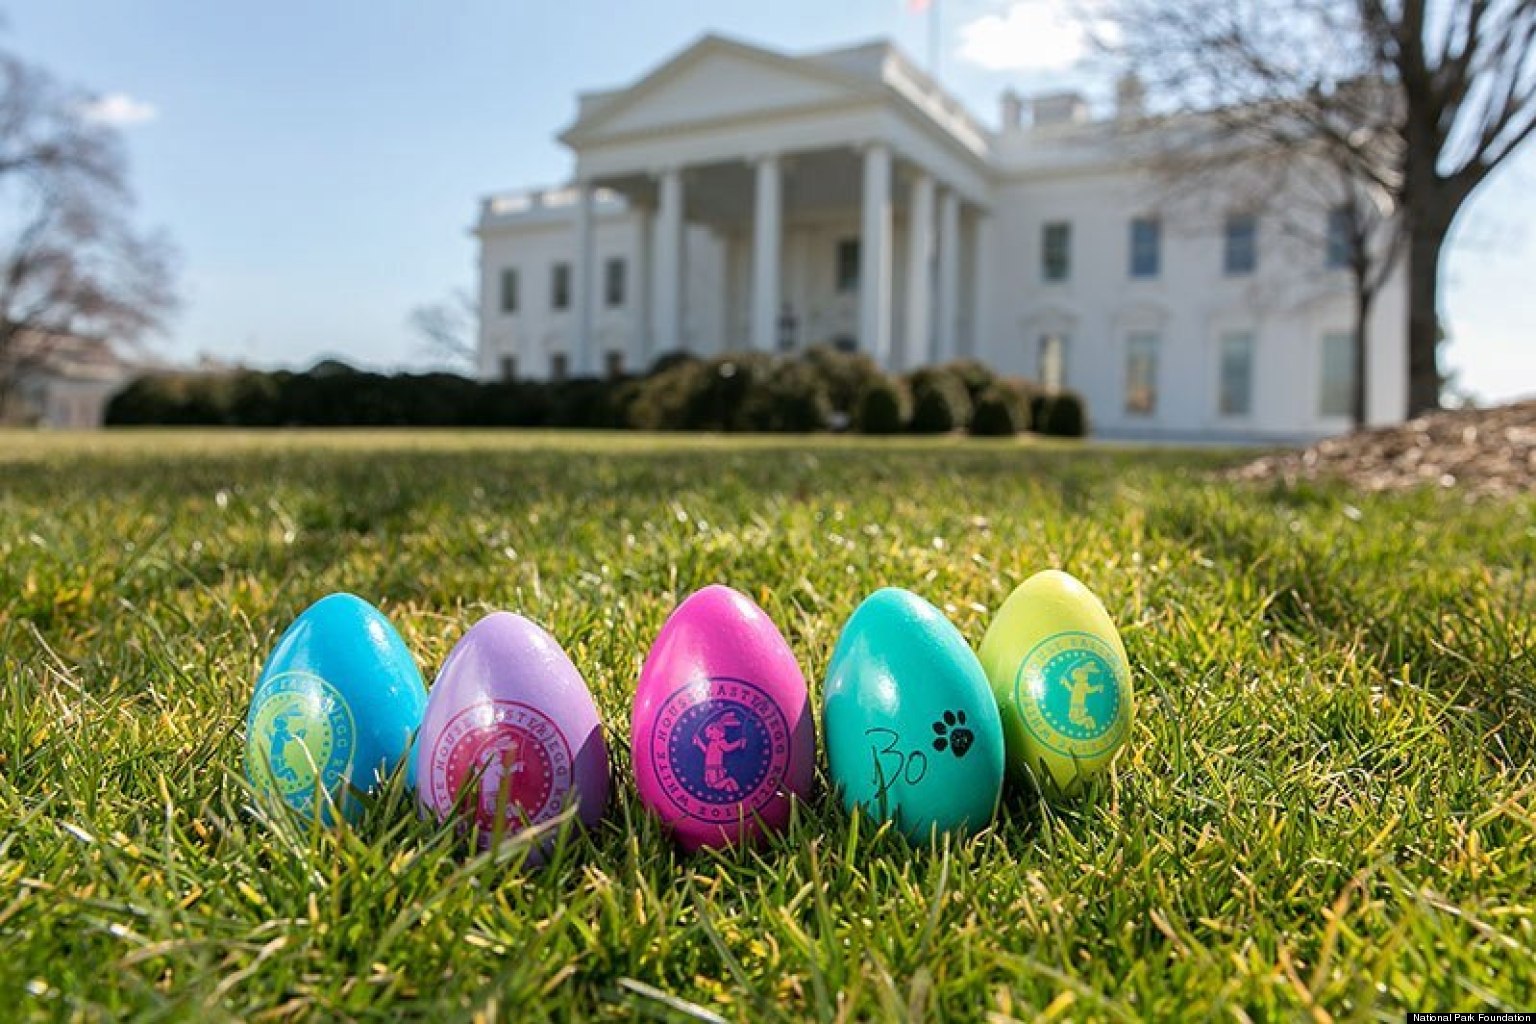 White House Easter Eggs Available For Purchase, Now With More Bo!